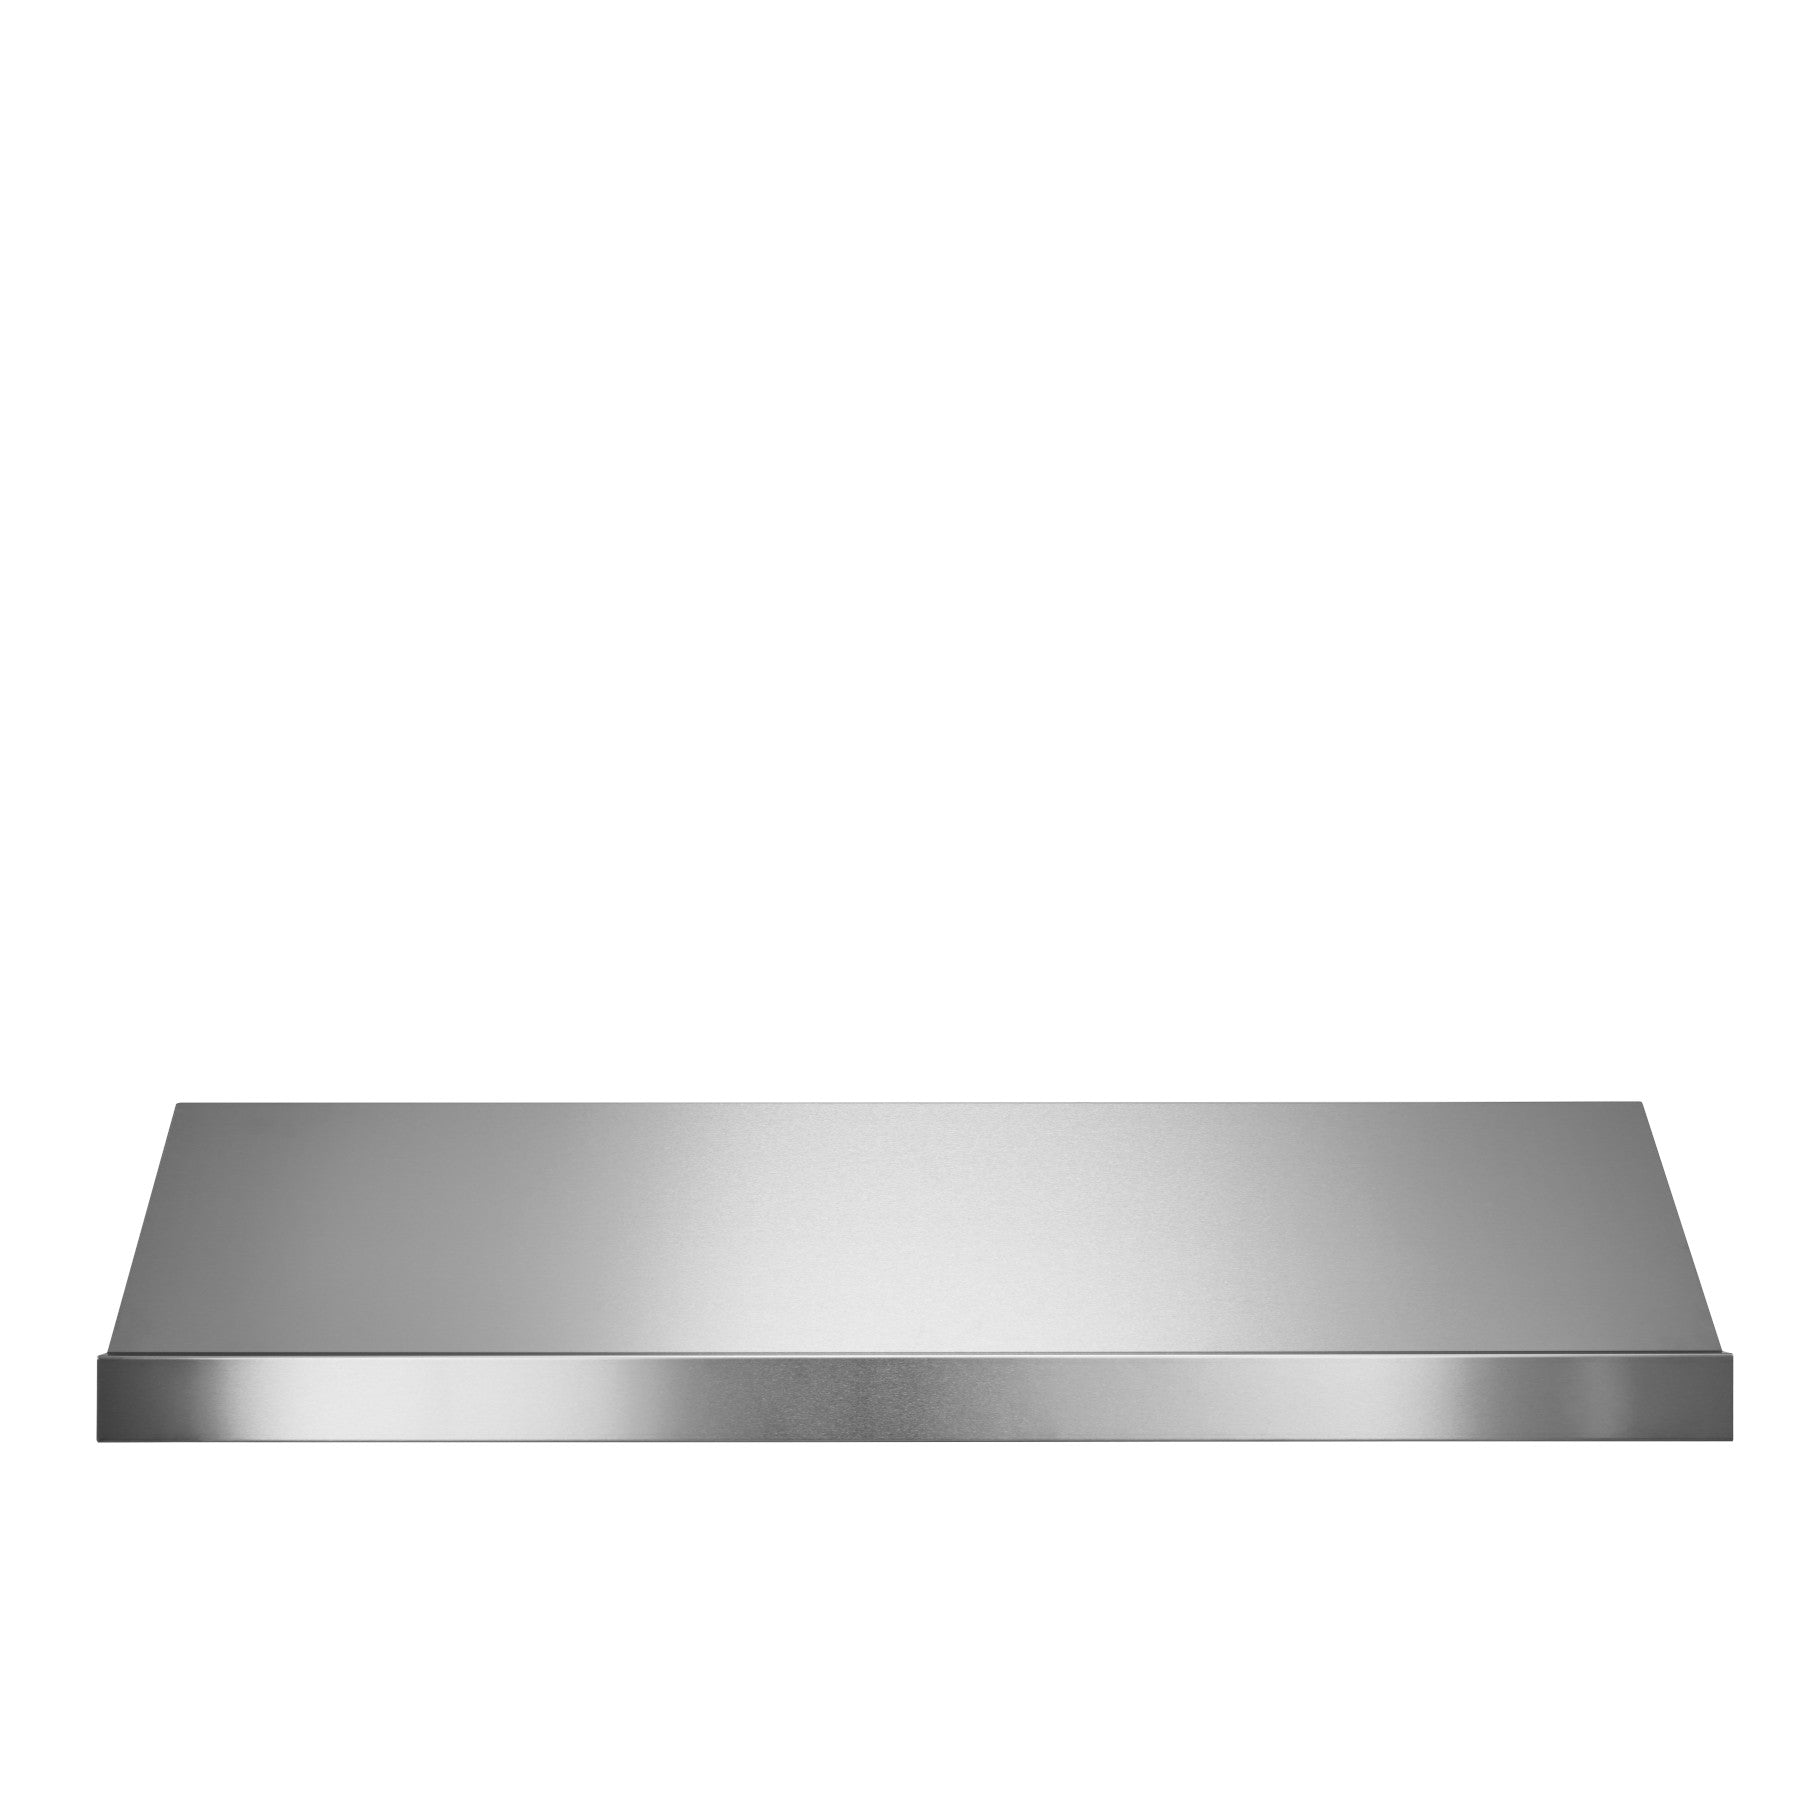 Best - 36 Inch Under Cabinet Range Vent in Stainless - UP26M36SB